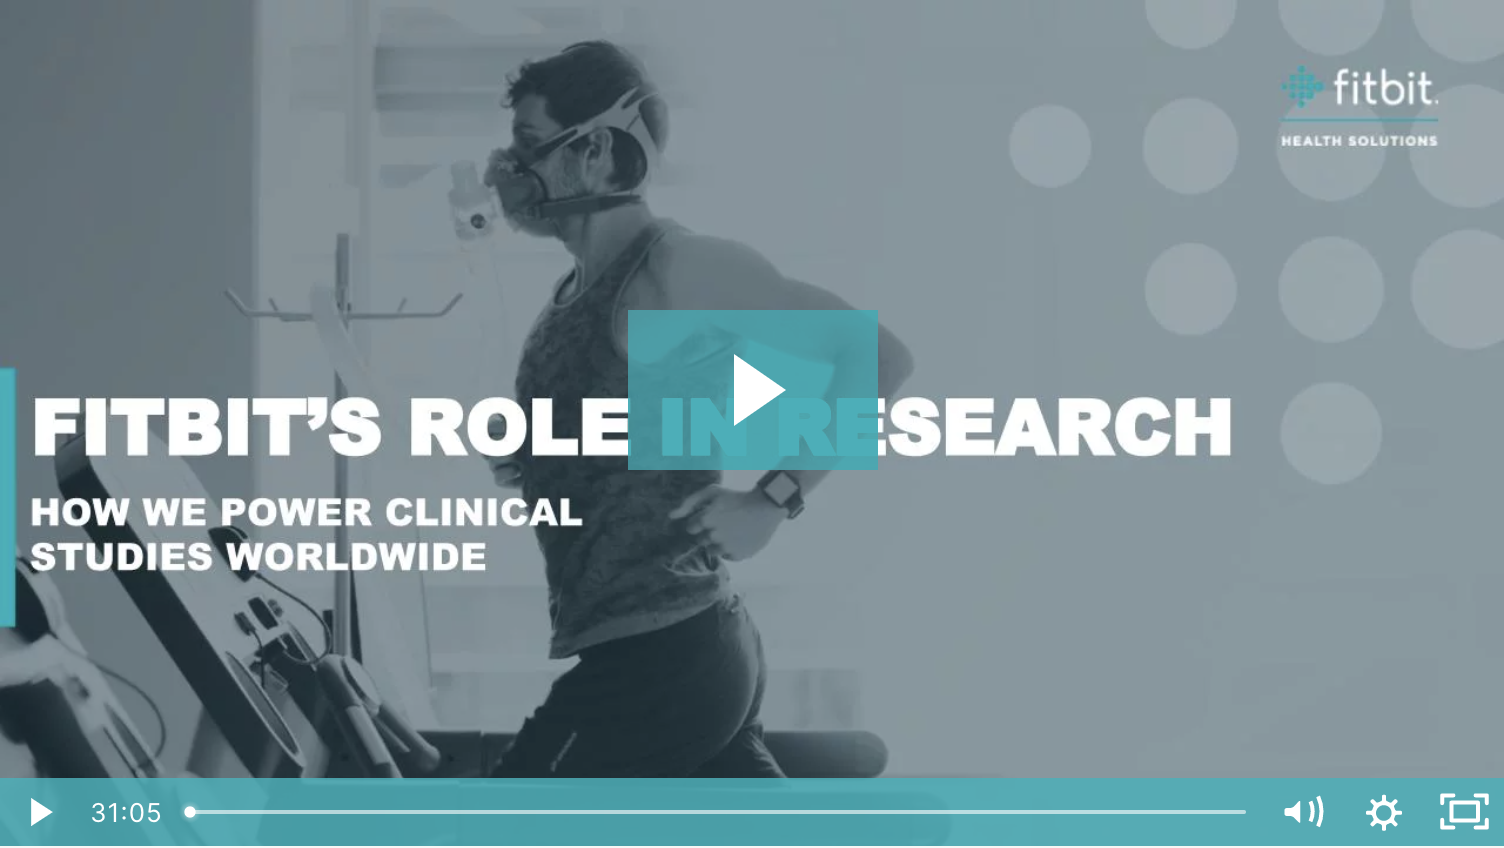 Image for Fitbit's Role in Research: How we power clinical studies worldwide